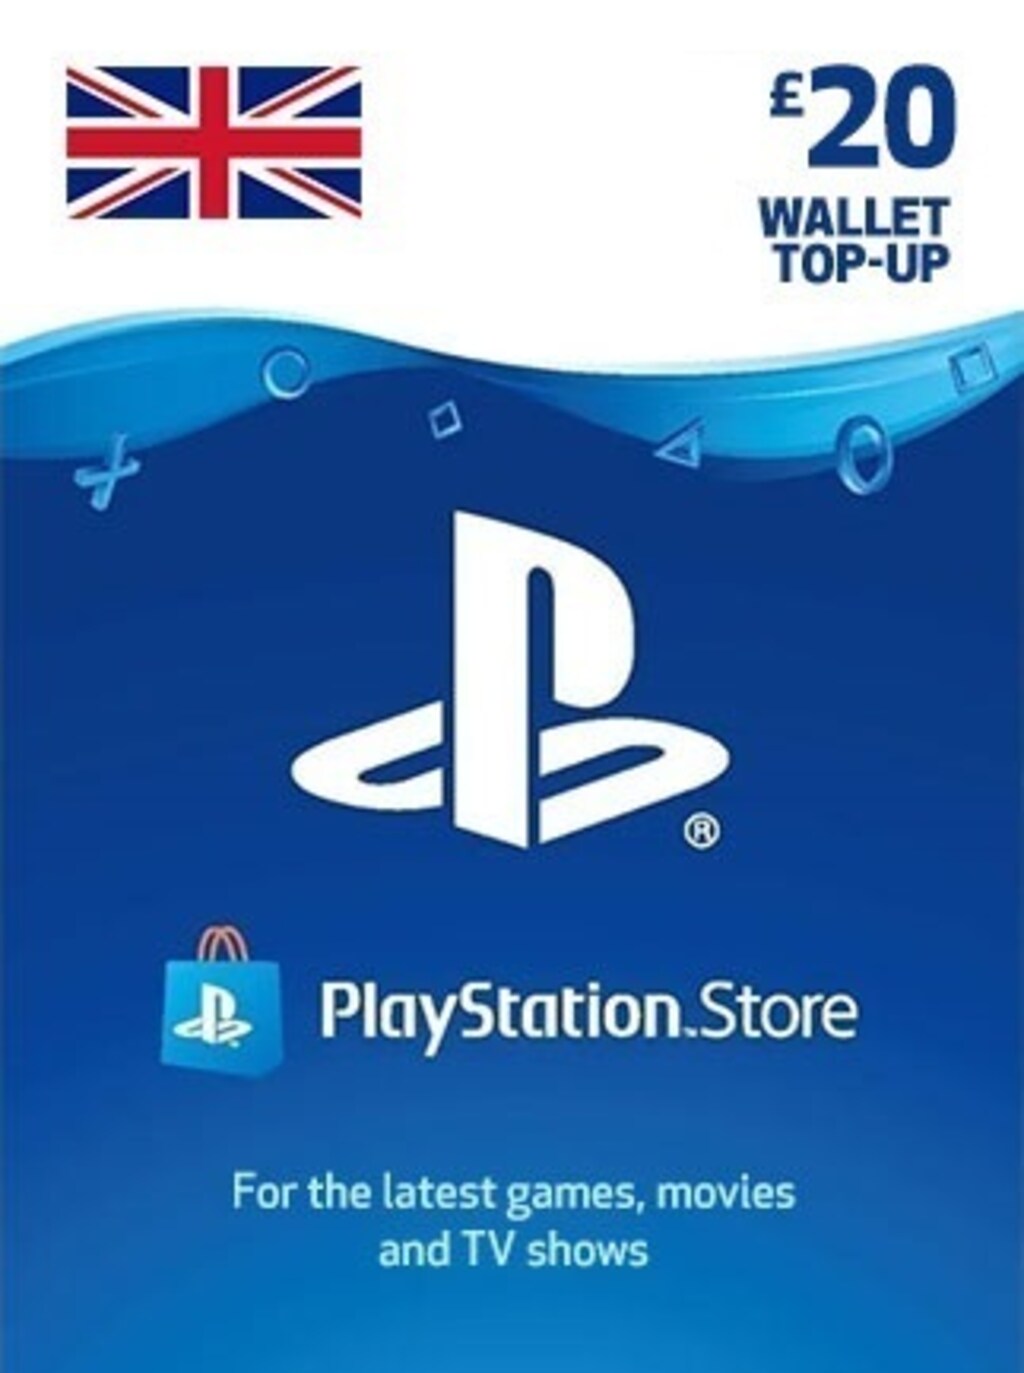 Buy PlayStation Game Cards Online